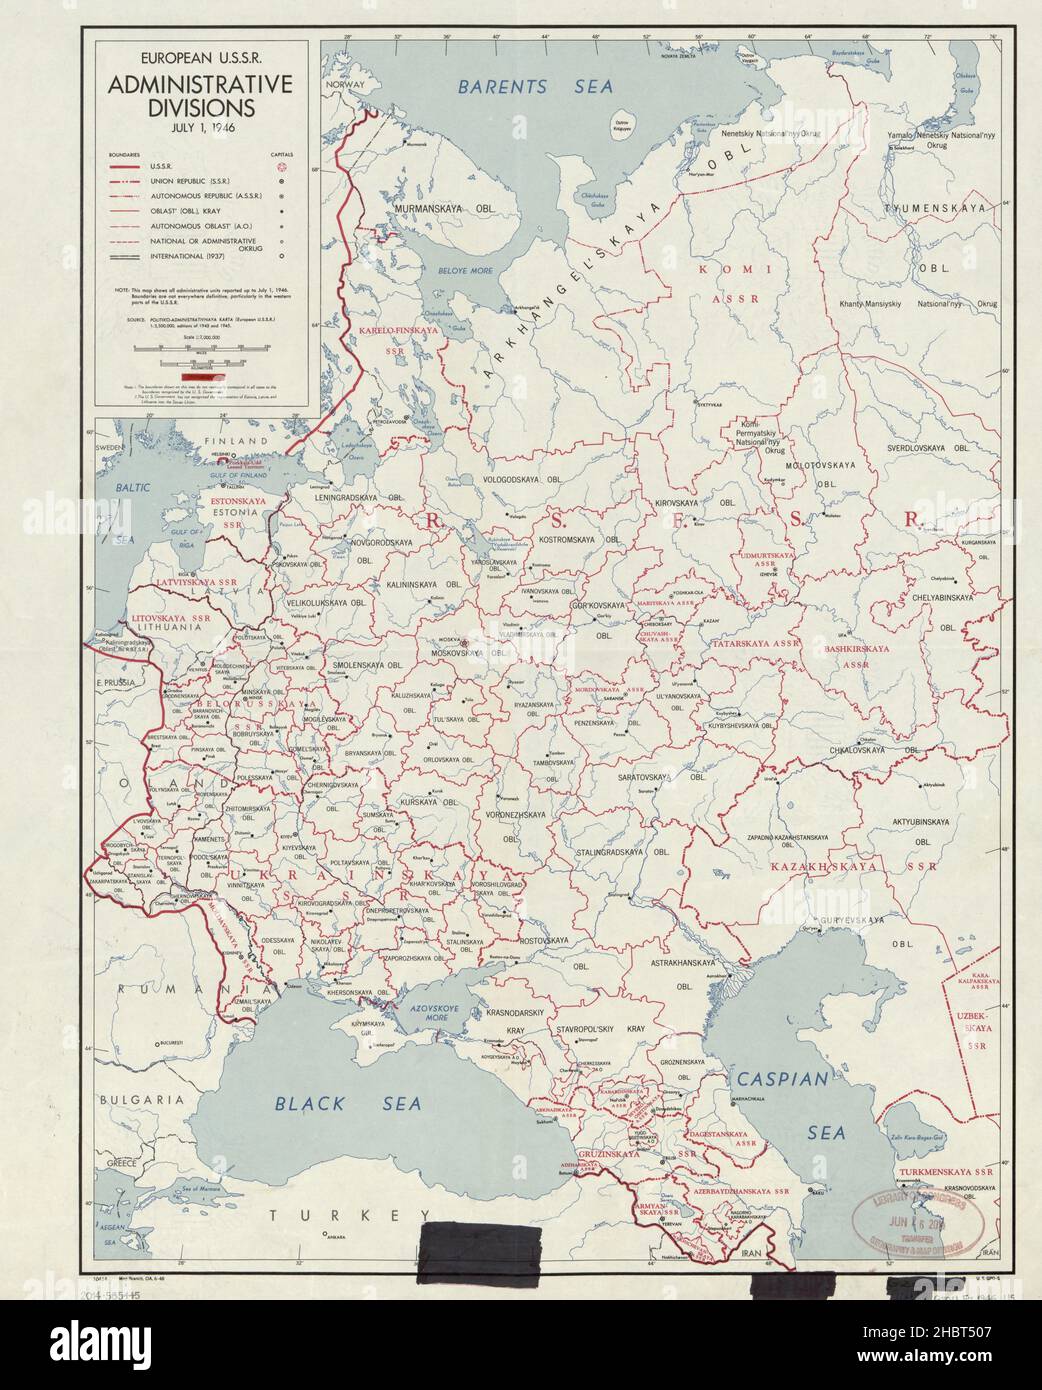 European U.S.S.R. administrative divisions - July 1, 1946 Map - Shows oblast, kray, autonomous republic level administrative divisions and their centers. Also shows the pre-World-War-II international boundaries in the annexed western territories Stock Photo